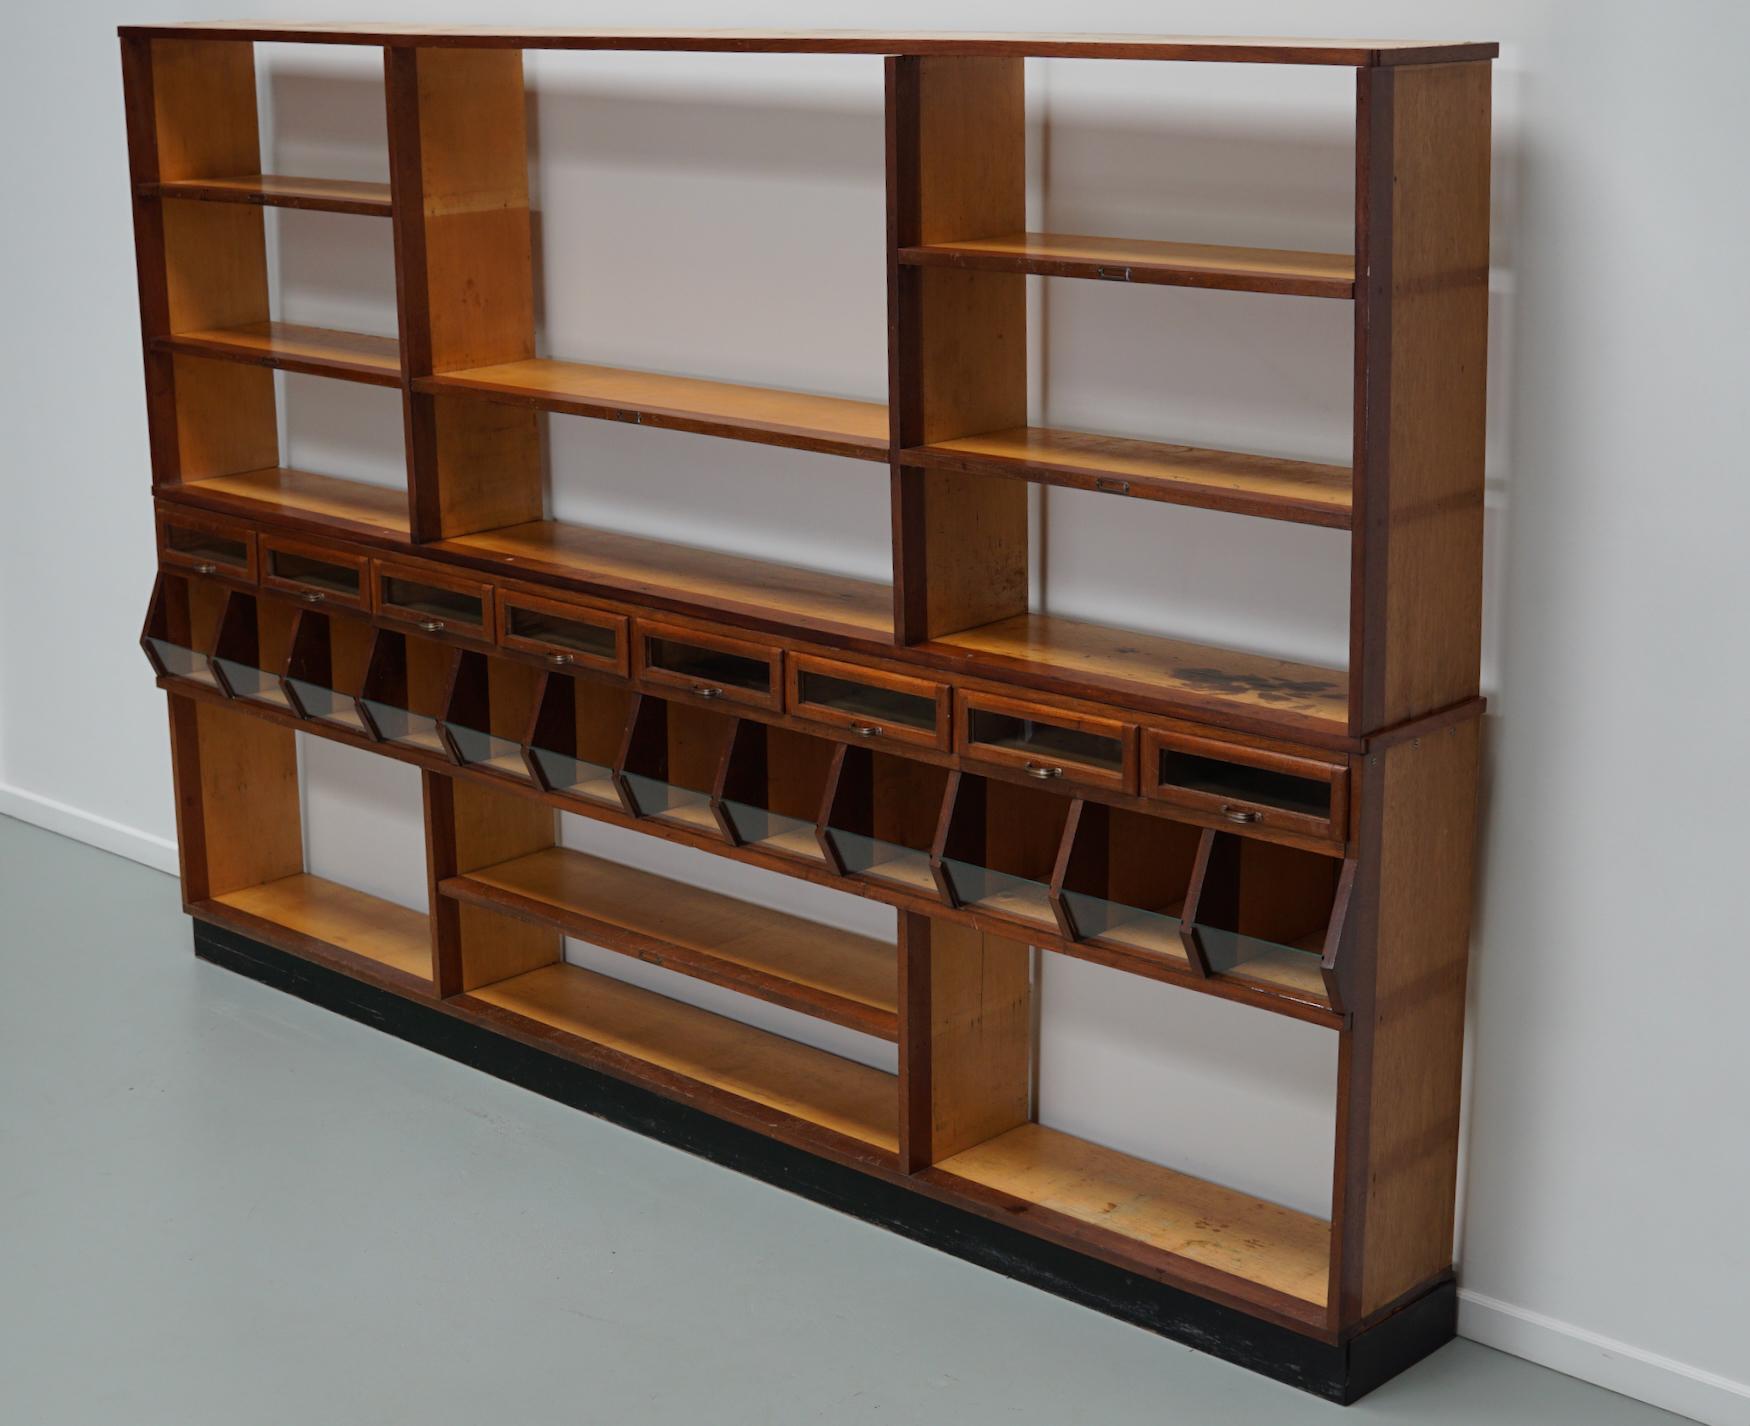 This shop cabinet was produced during the 1950s in the Netherlands. This piece features 12 compartments and 8 drawers with glass fronts and 6 shelves. It was originally used in a grocery store in the mid 20th century in the Dutch city of Maastricht.